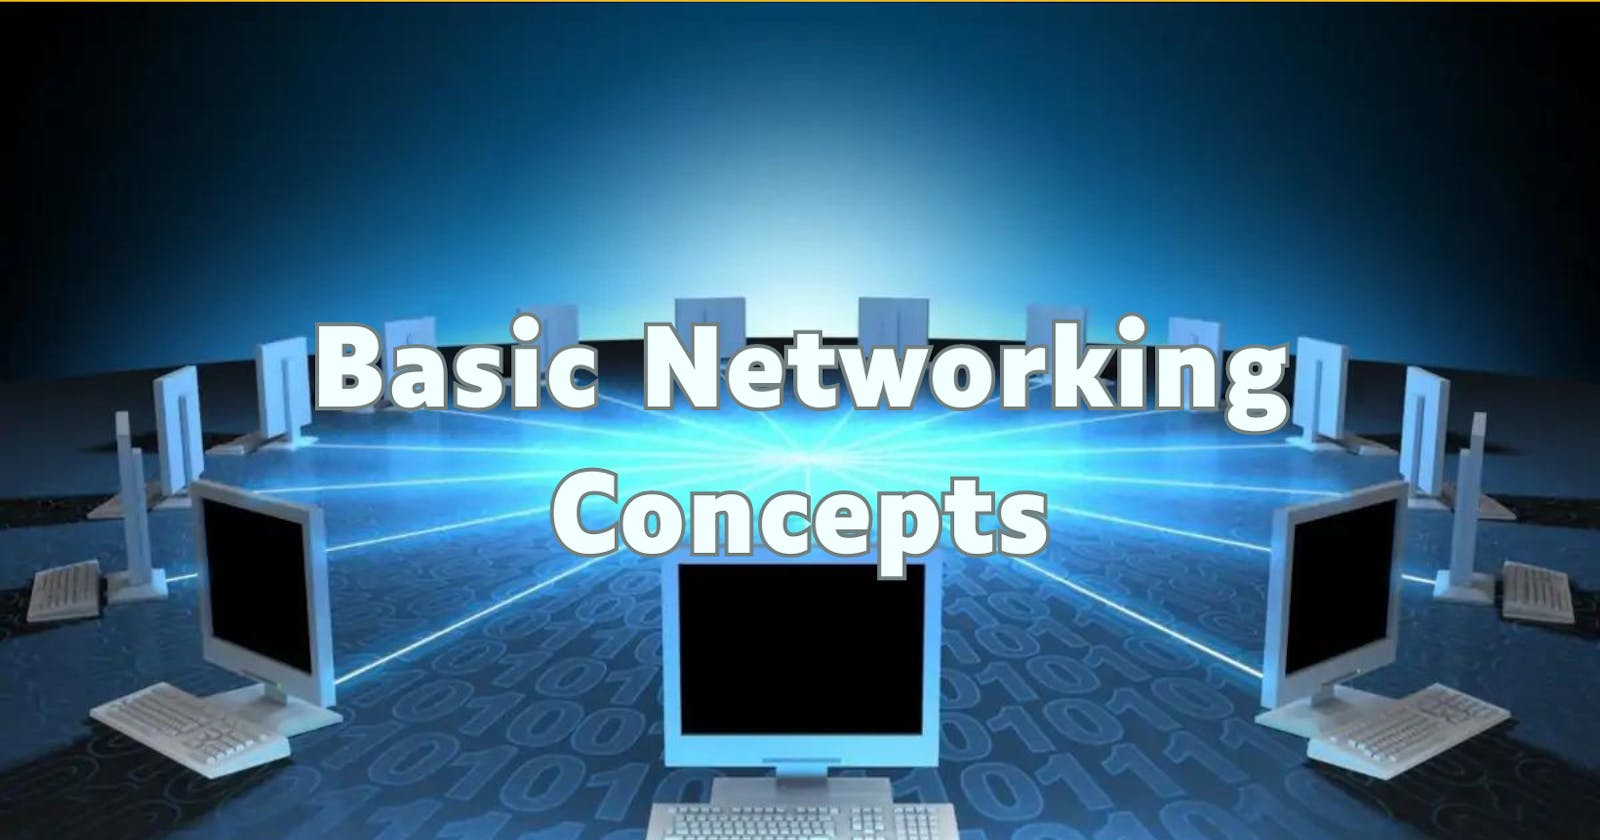 Basic Networking concepts